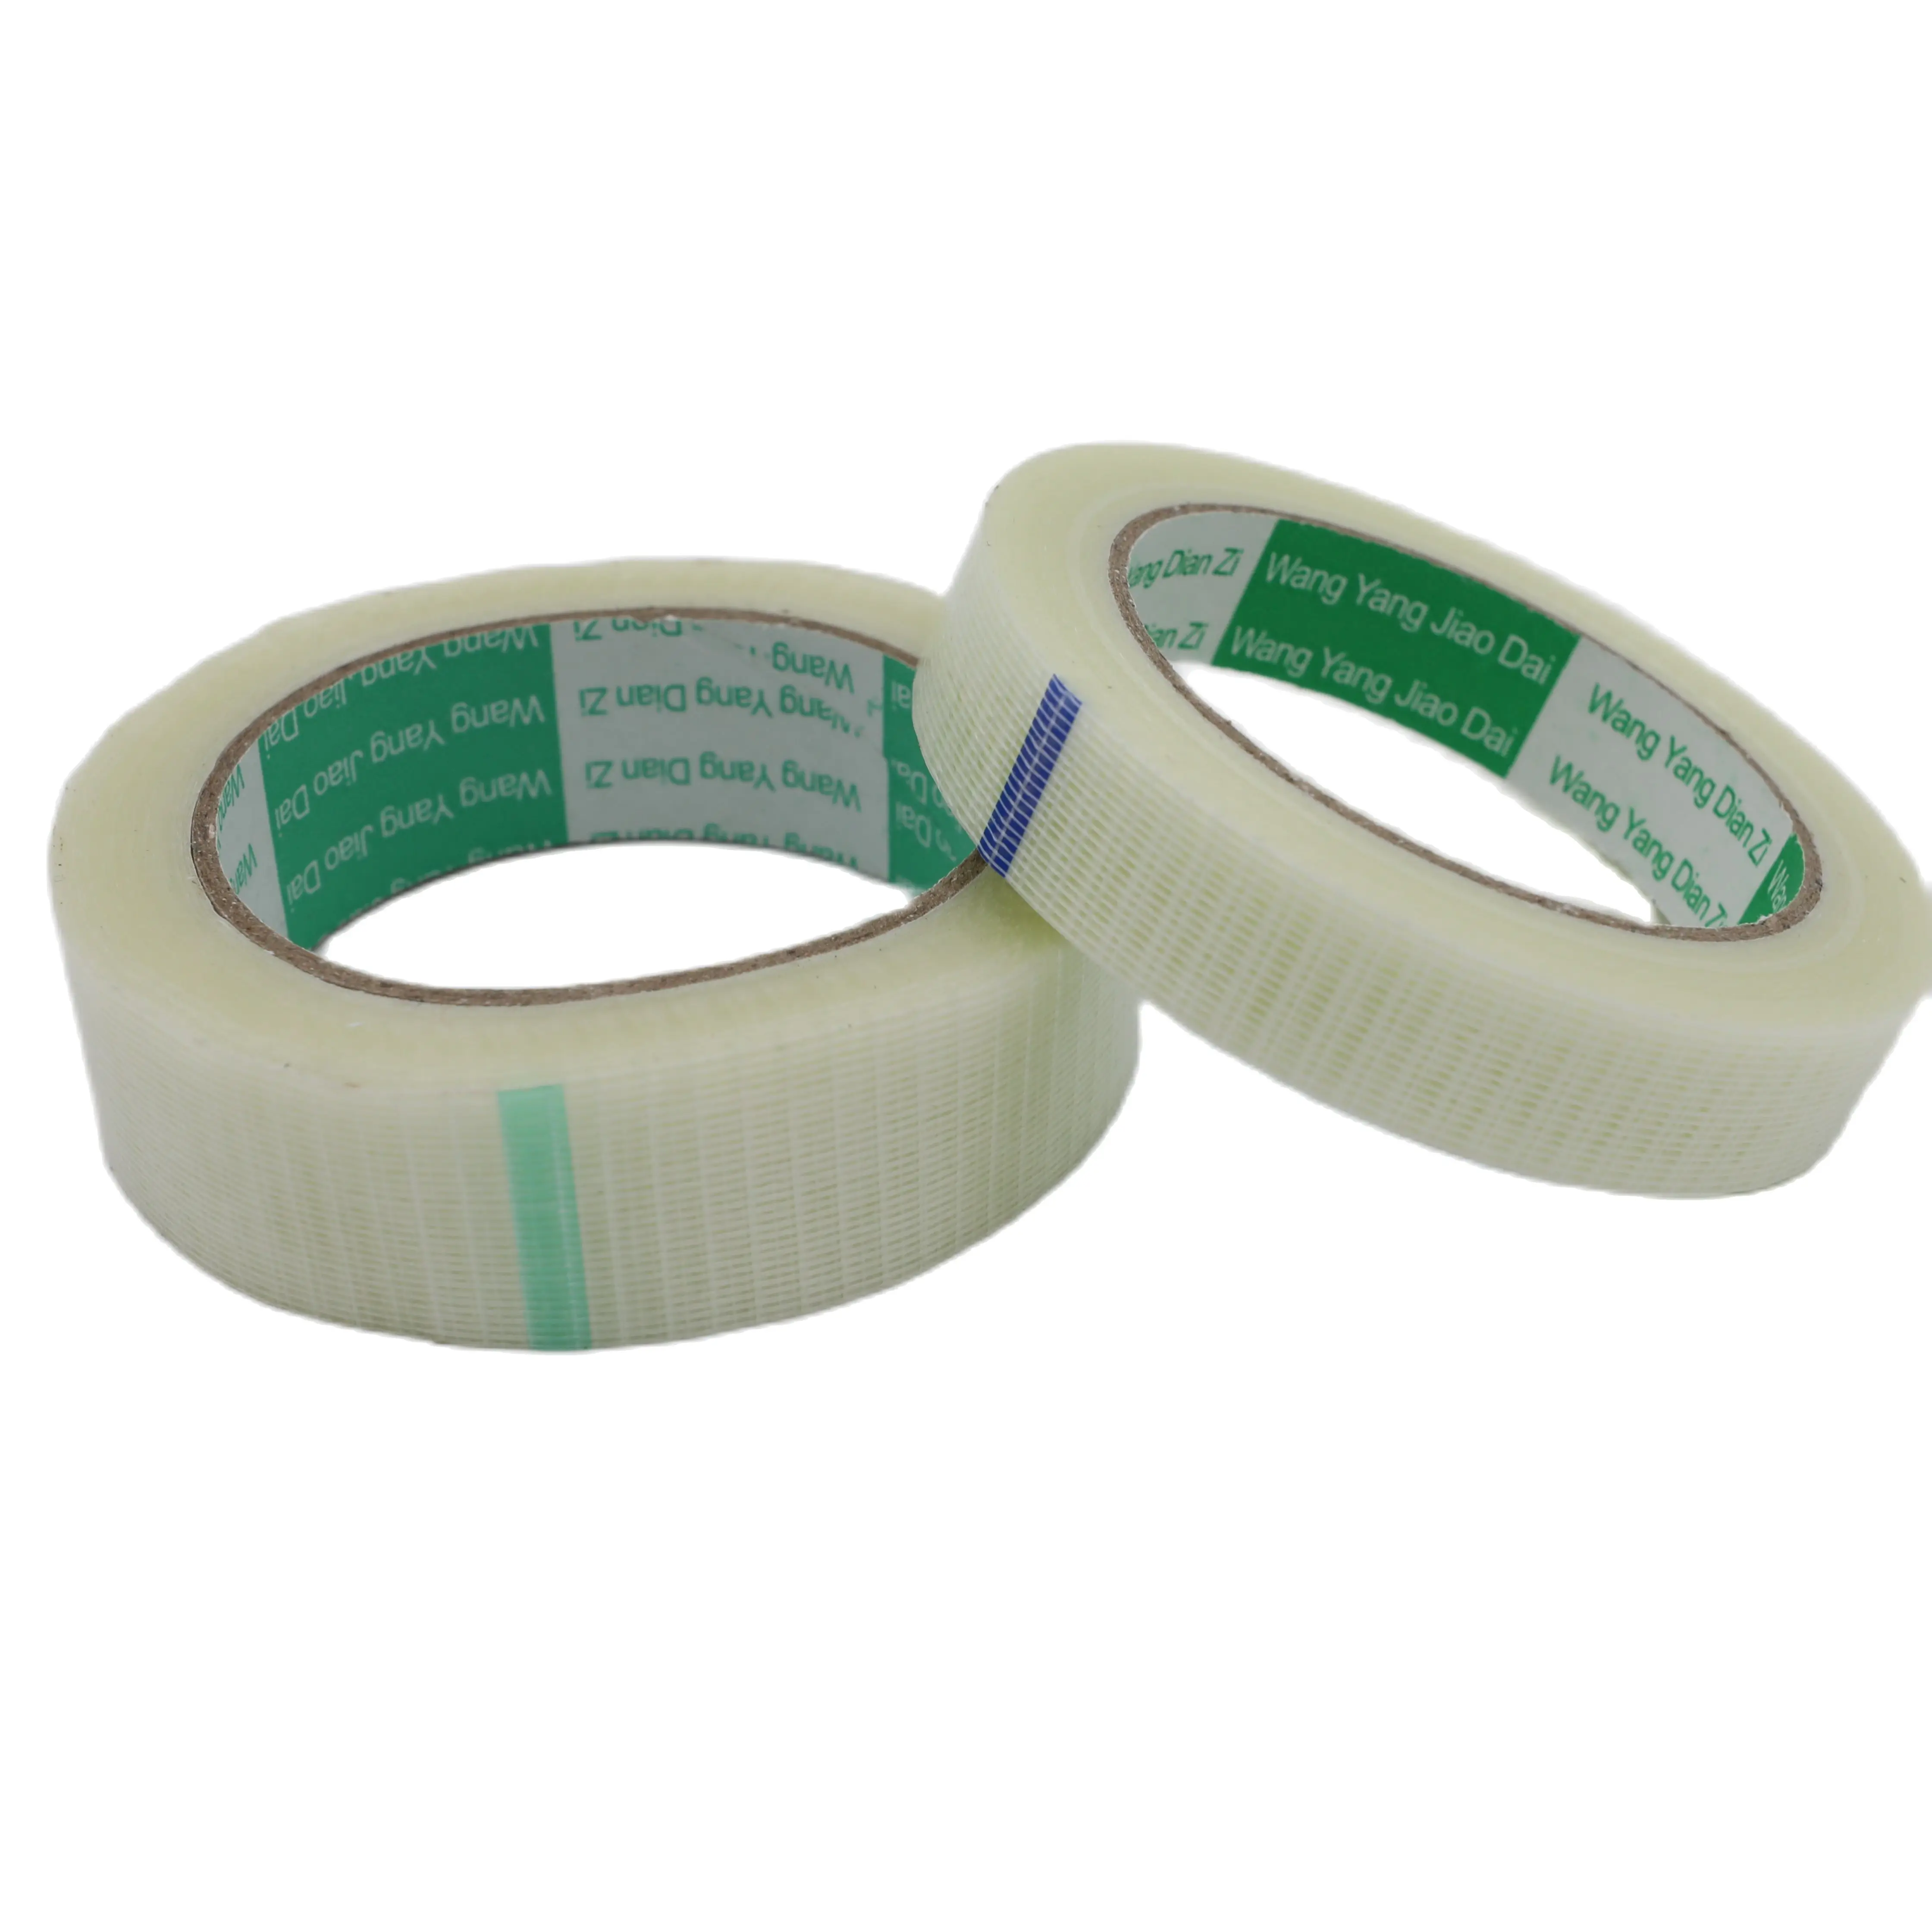 1pc / Volumes High Strength Transparent Grid Type  Glass Fiber Reinforced Plastic Waterproof And Wear-Resistant Adhesive Tape